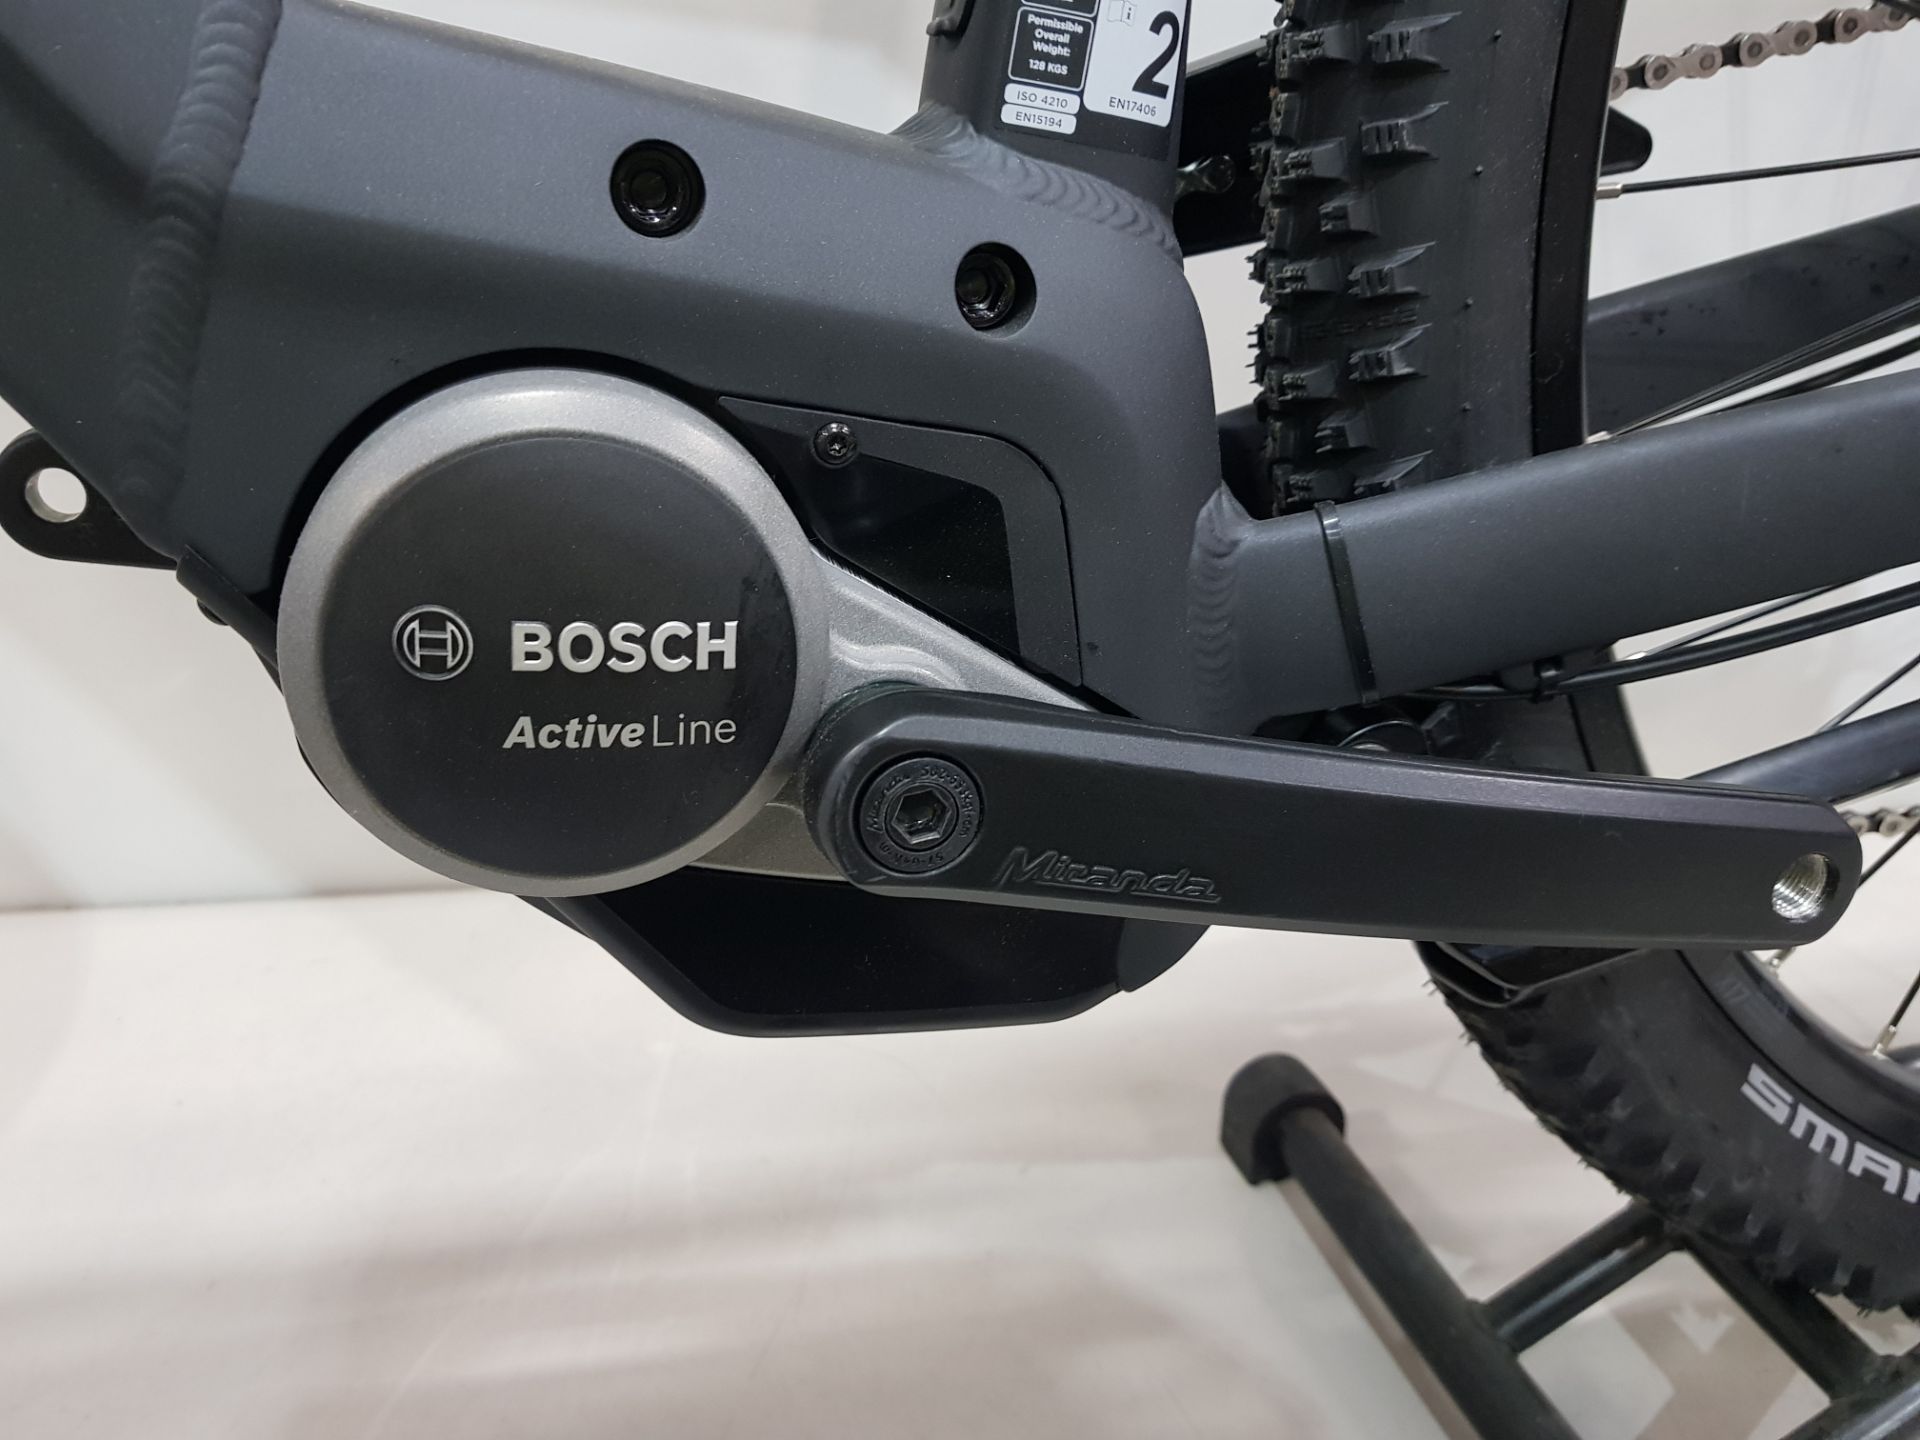 SCOTT SUB CROS ERIDE 30 MEN 286581. SIZE (L). EQUIPPED WITH THE POWERFUL BOSCH ACTIVE DRIVE UNIT, - Image 2 of 7